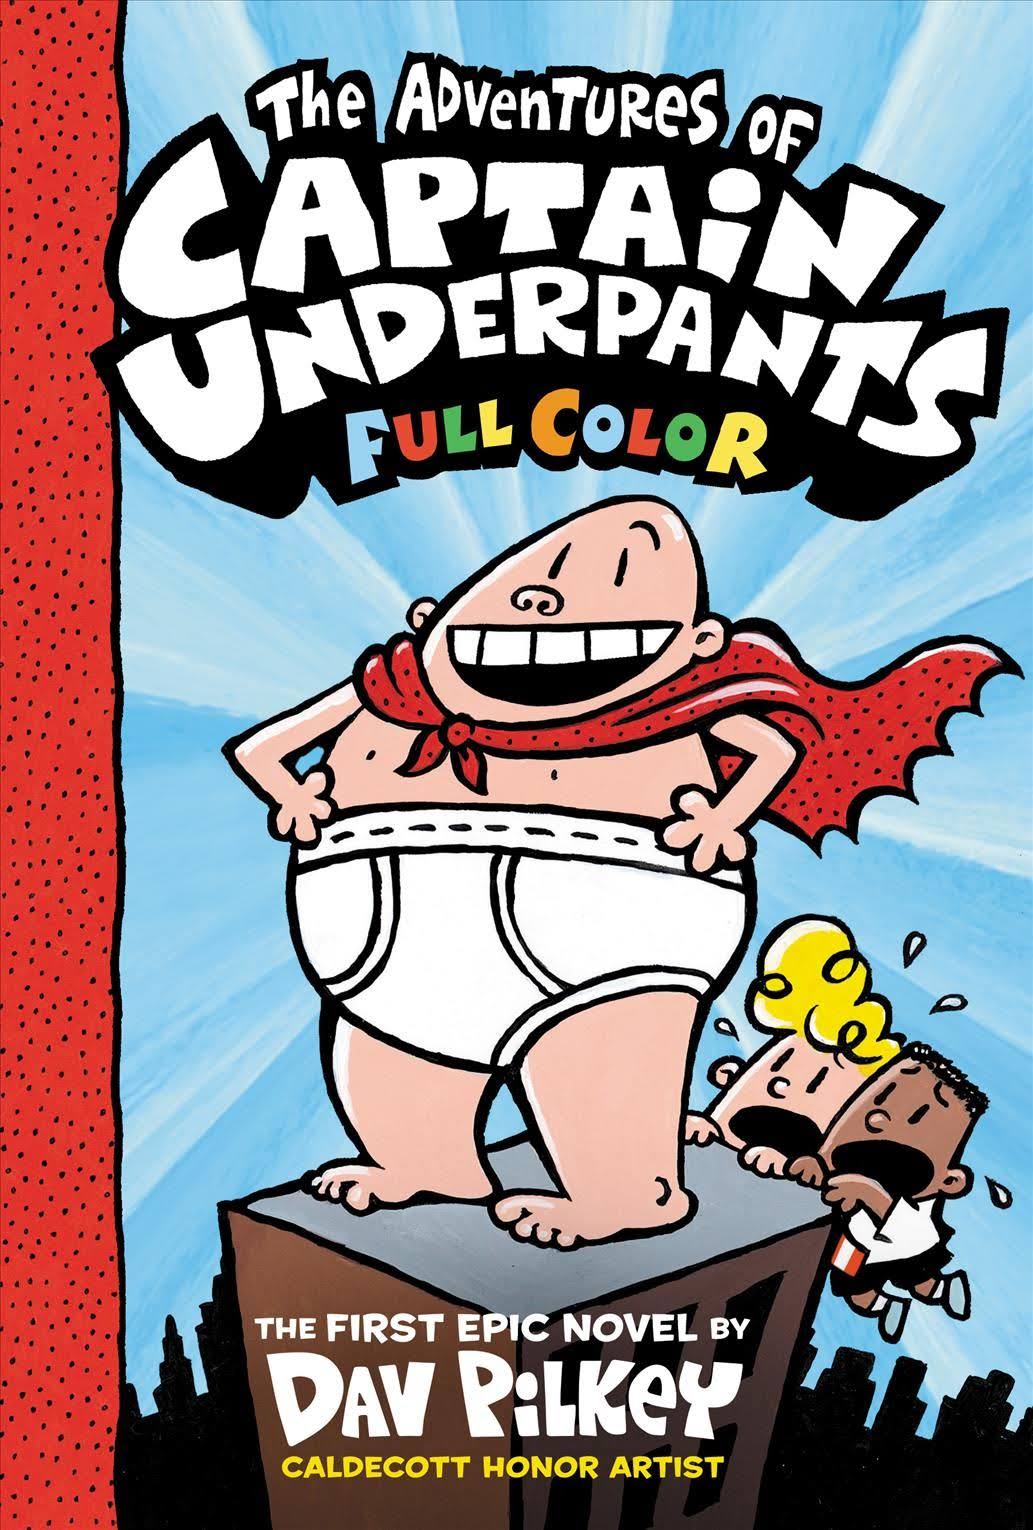 The Adventures of Captain Underpants Color Edition by Dav Pilkey